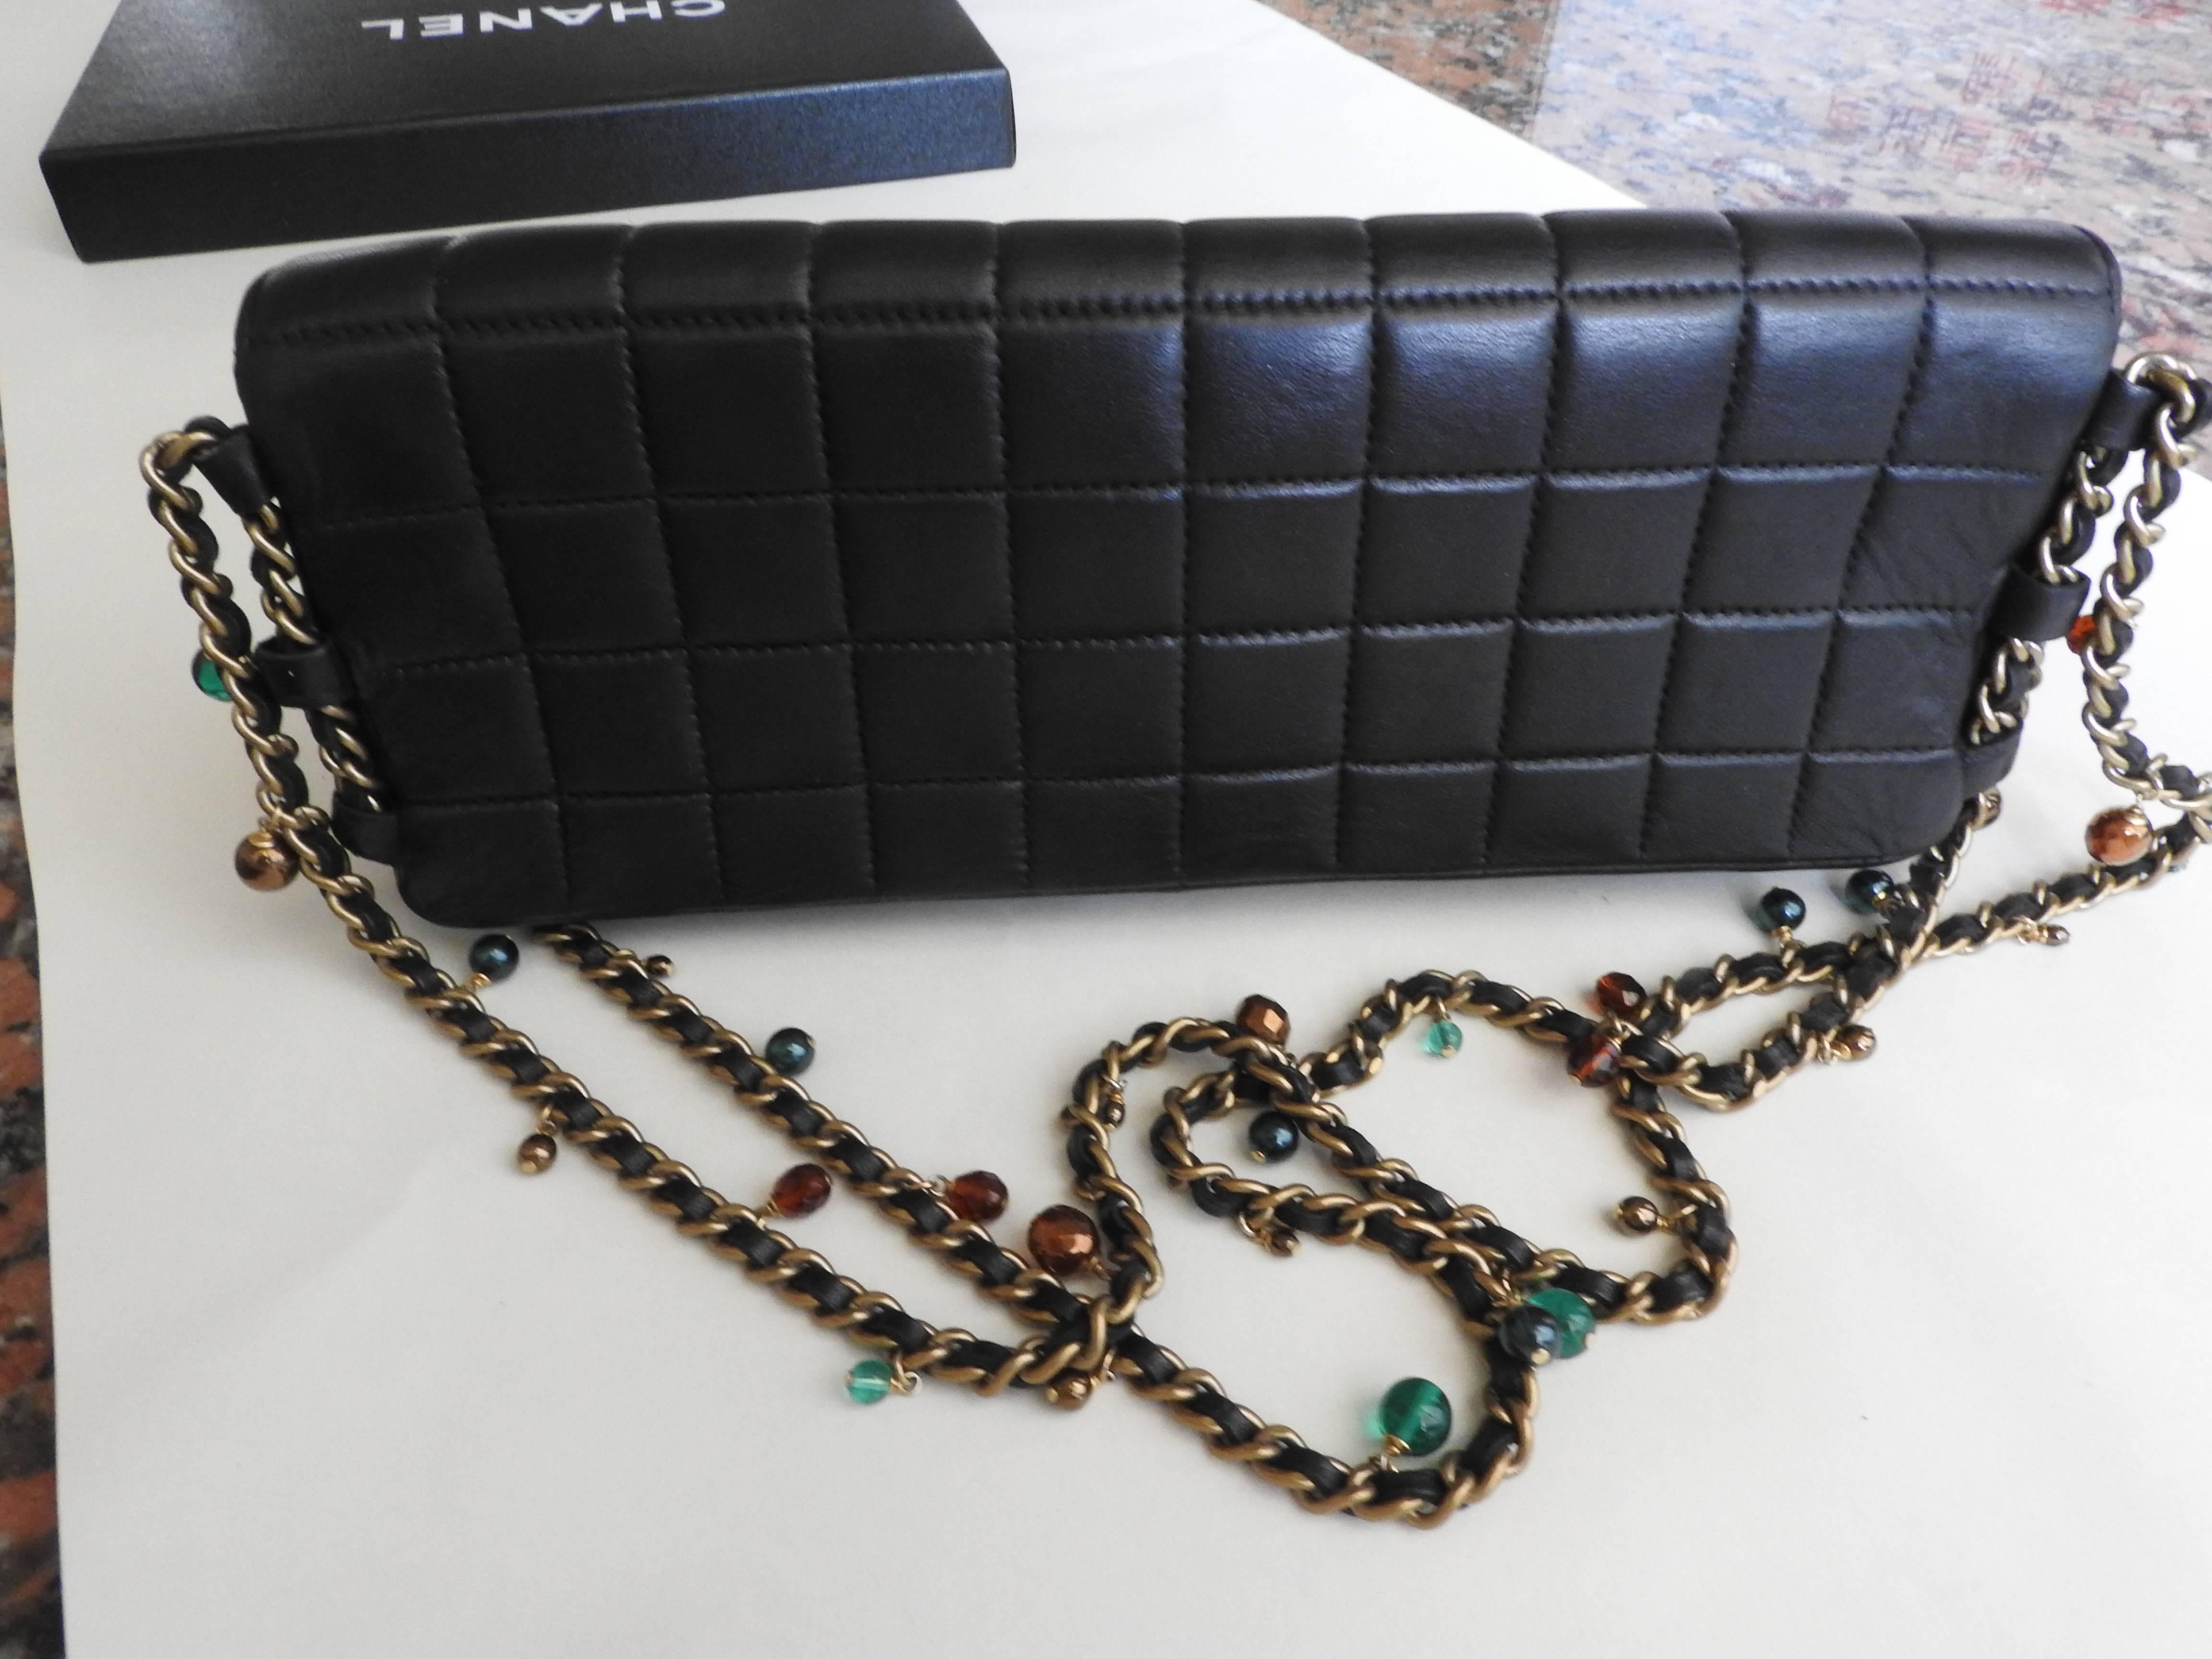 This double jeweled chain bag is so sumptuously adorned with Gripoix glass
 beads, faux pearls, and intertwined with lambskin strips. The material of the
 bag is fully done inside out by black leather. 
 This gorgeous 2003  vintage piece has